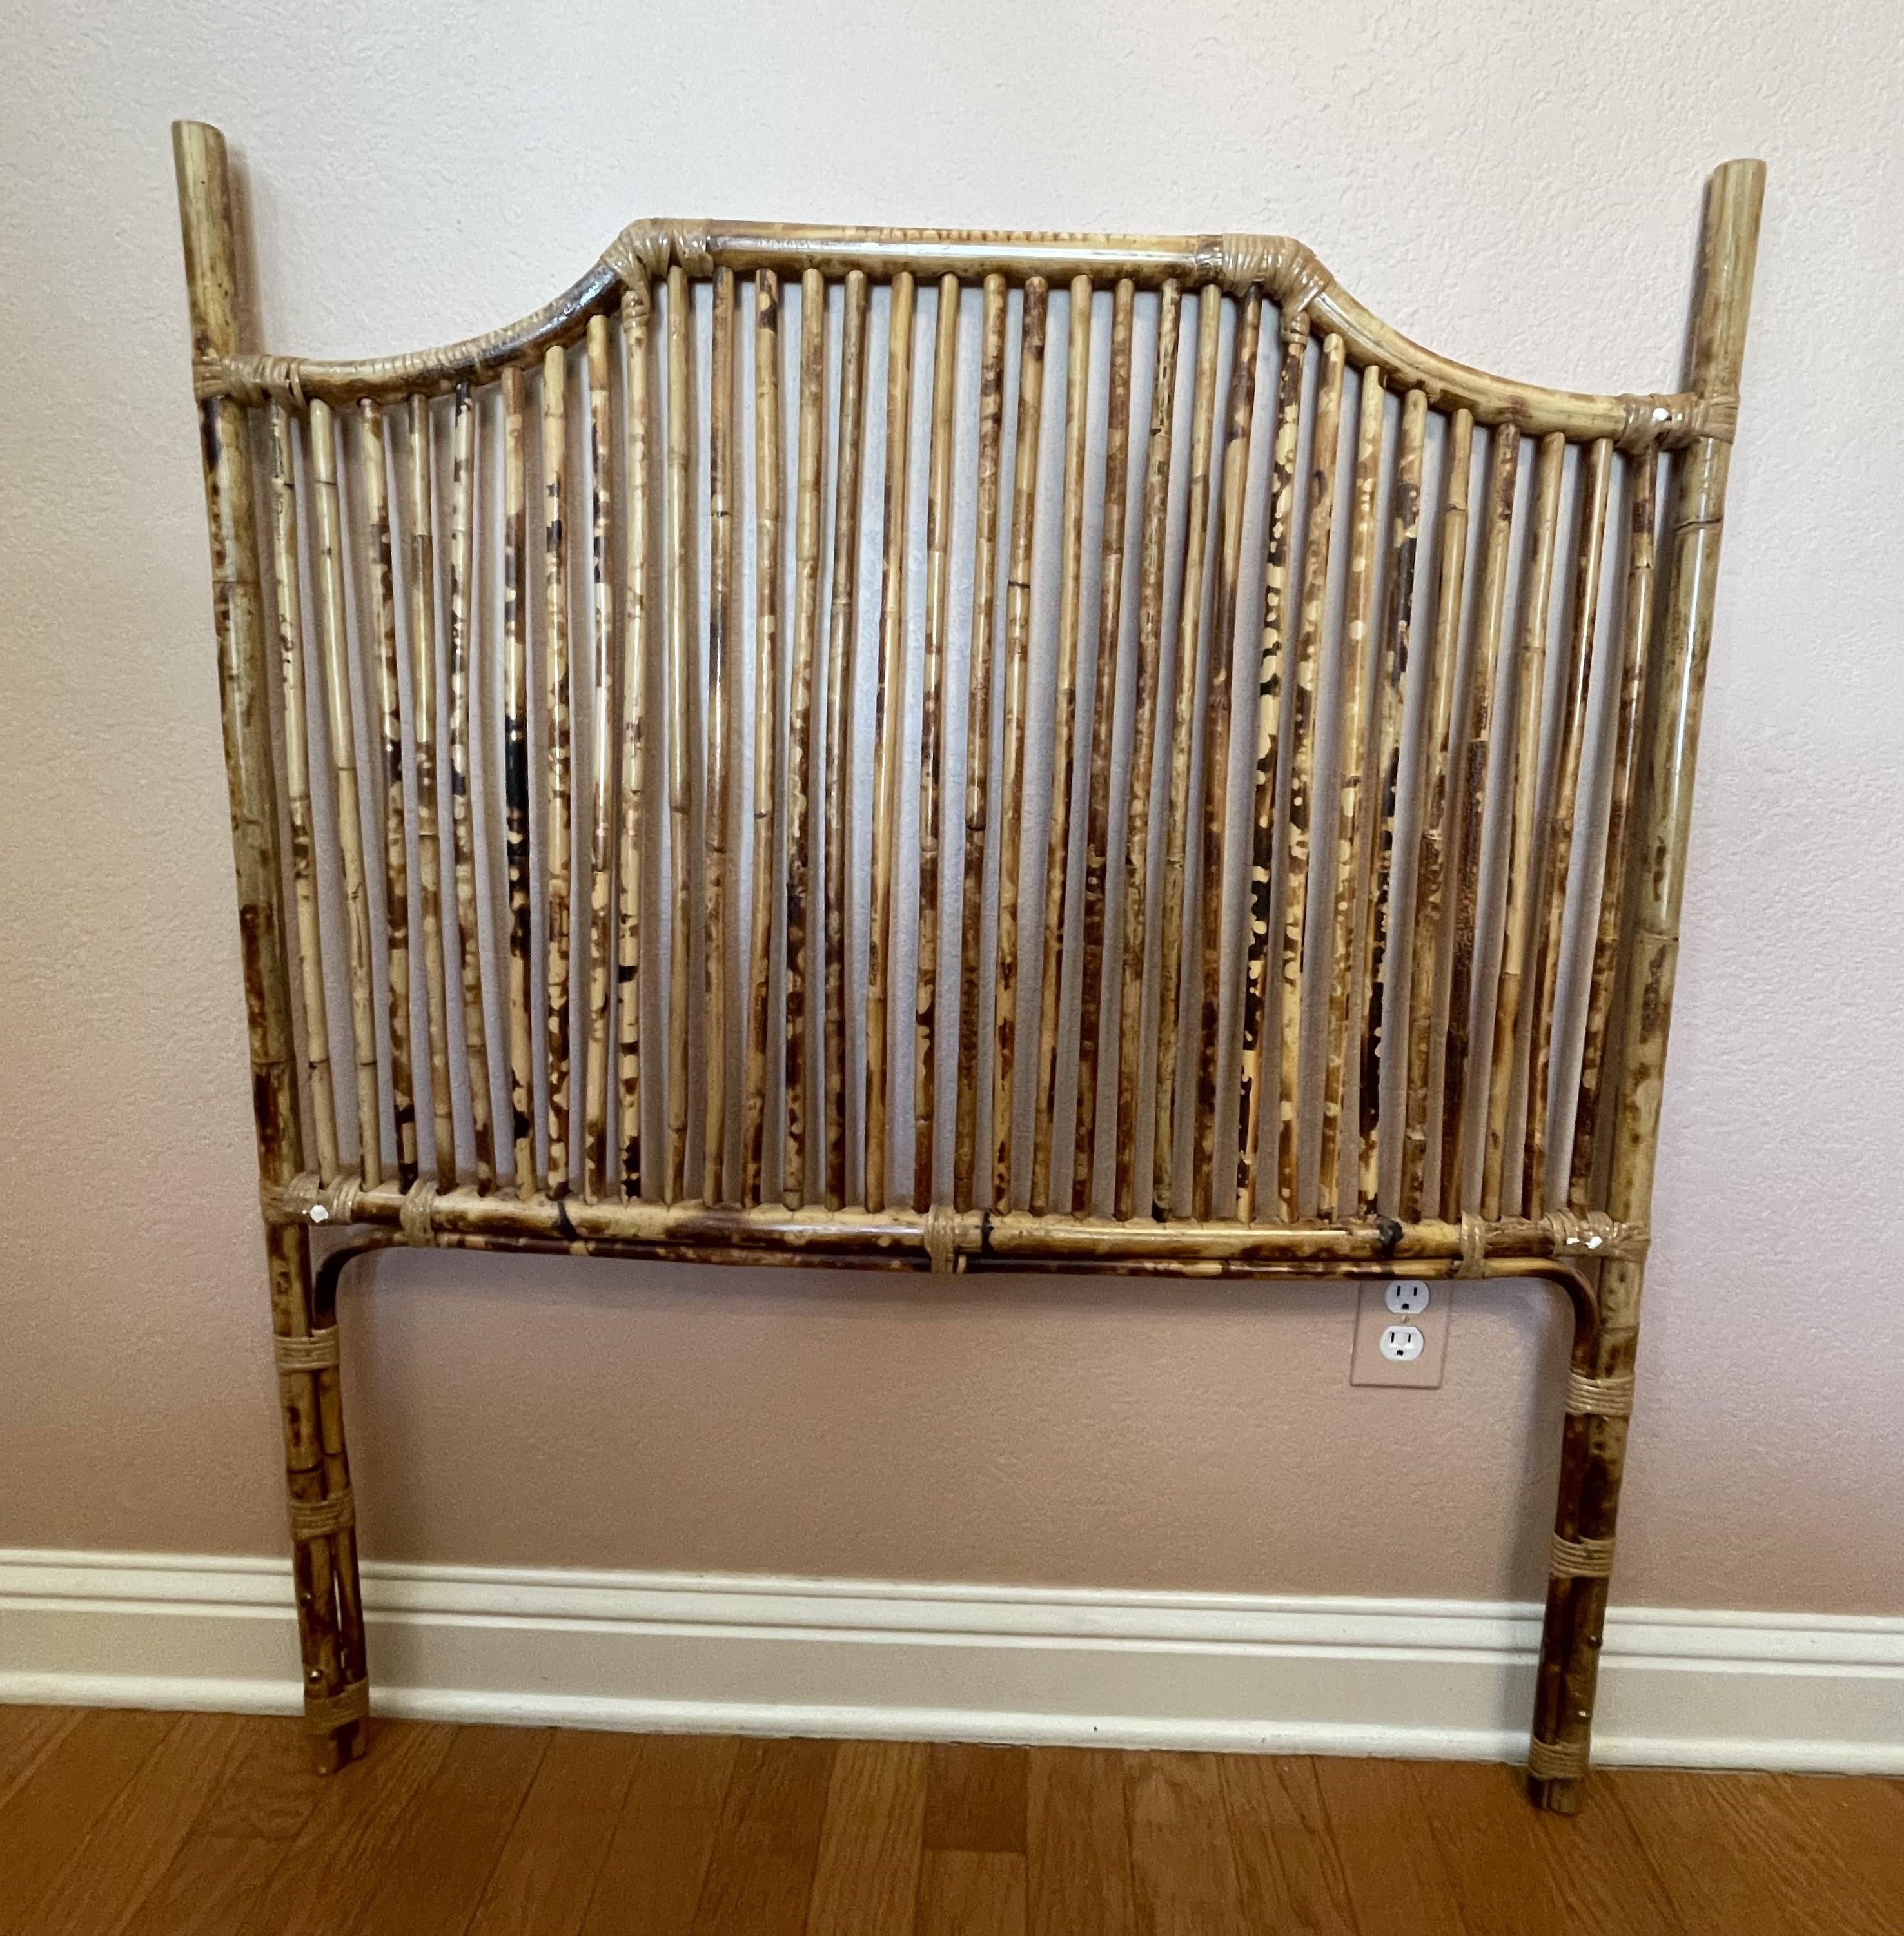 Mid-20th Century Tortoise-Bamboo and Rattan Headboards -- A Pair In Excellent Condition For Sale In Austin, TX